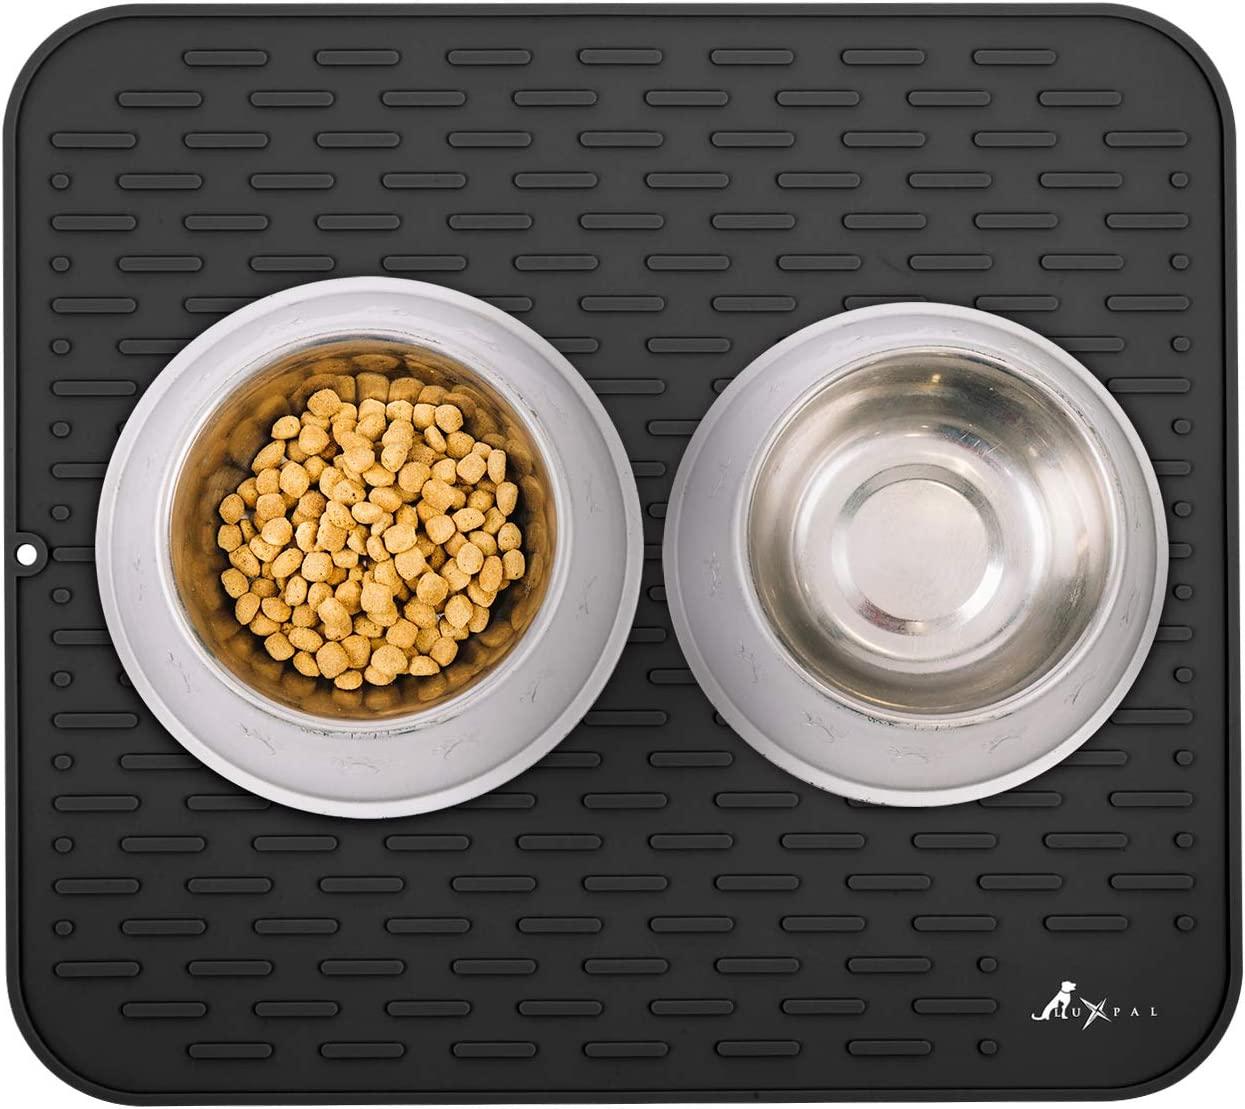 Dog Food Mat, Silicone Dog Cat Bowl Mat, Non Slip Waterproof Pet Feeding Mat FDA Grade Food Container Placemat for Small Animals, Size: Medium, Gray